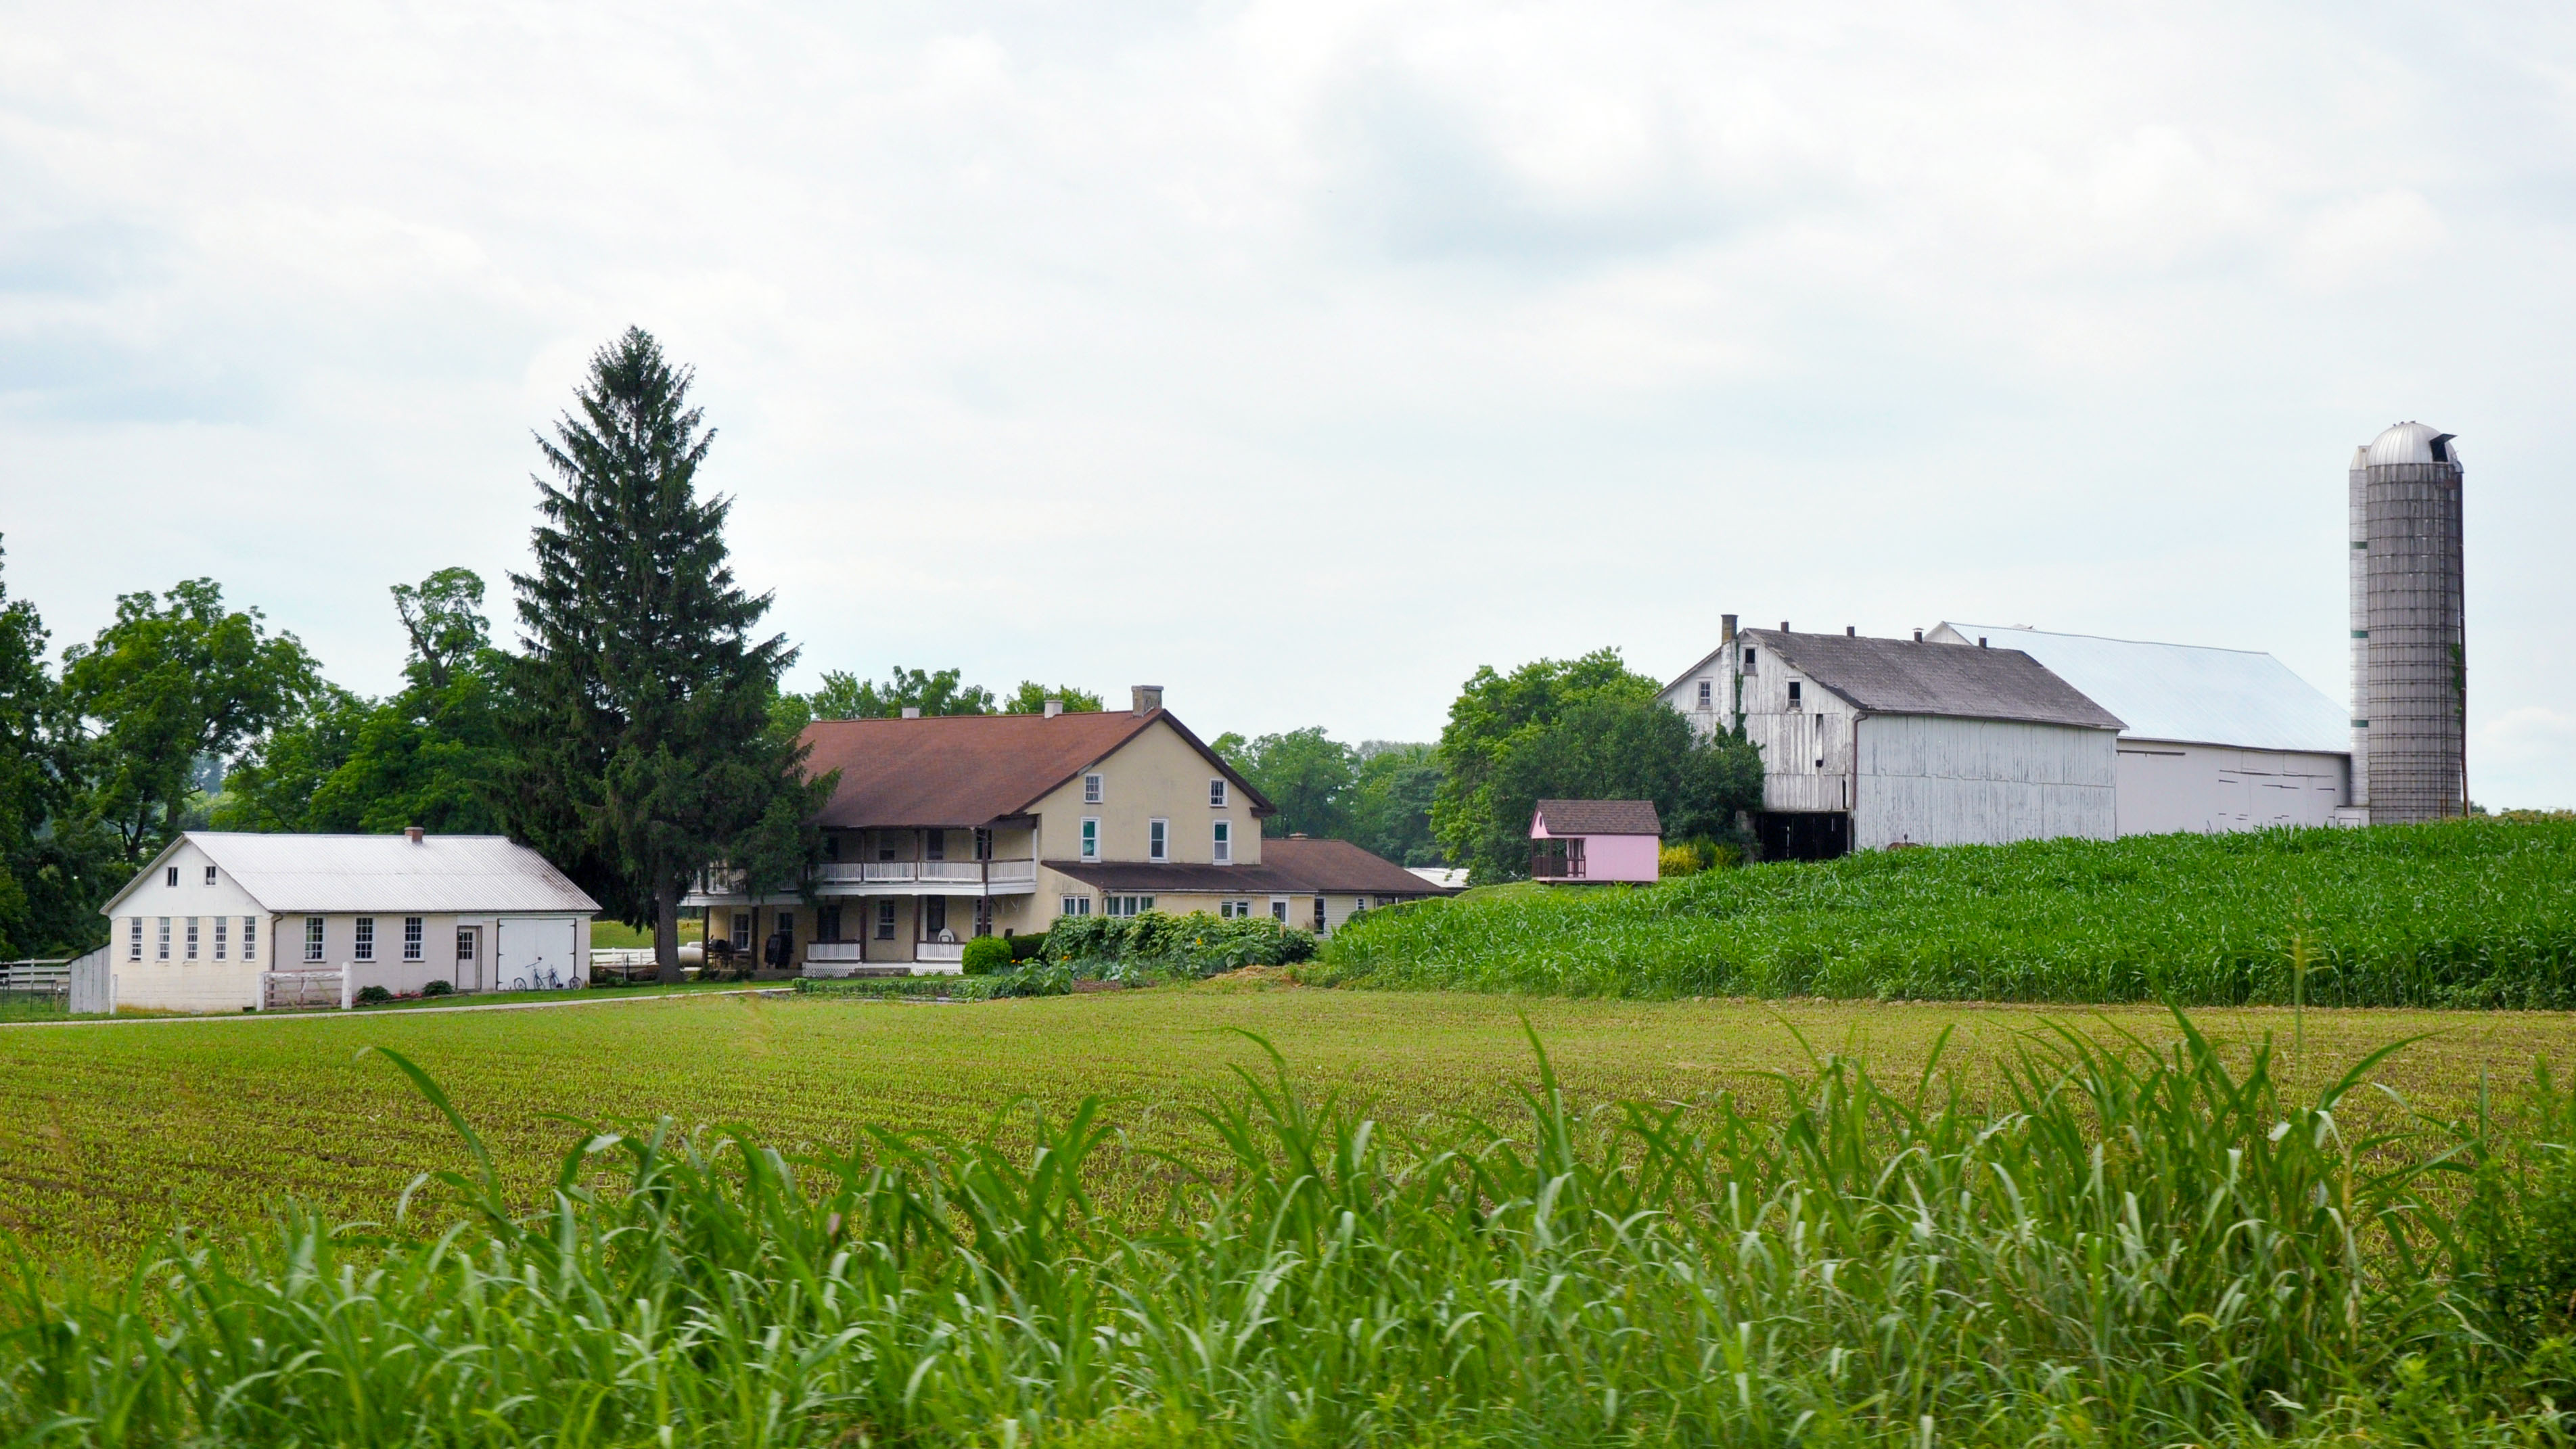 A field and Amish house